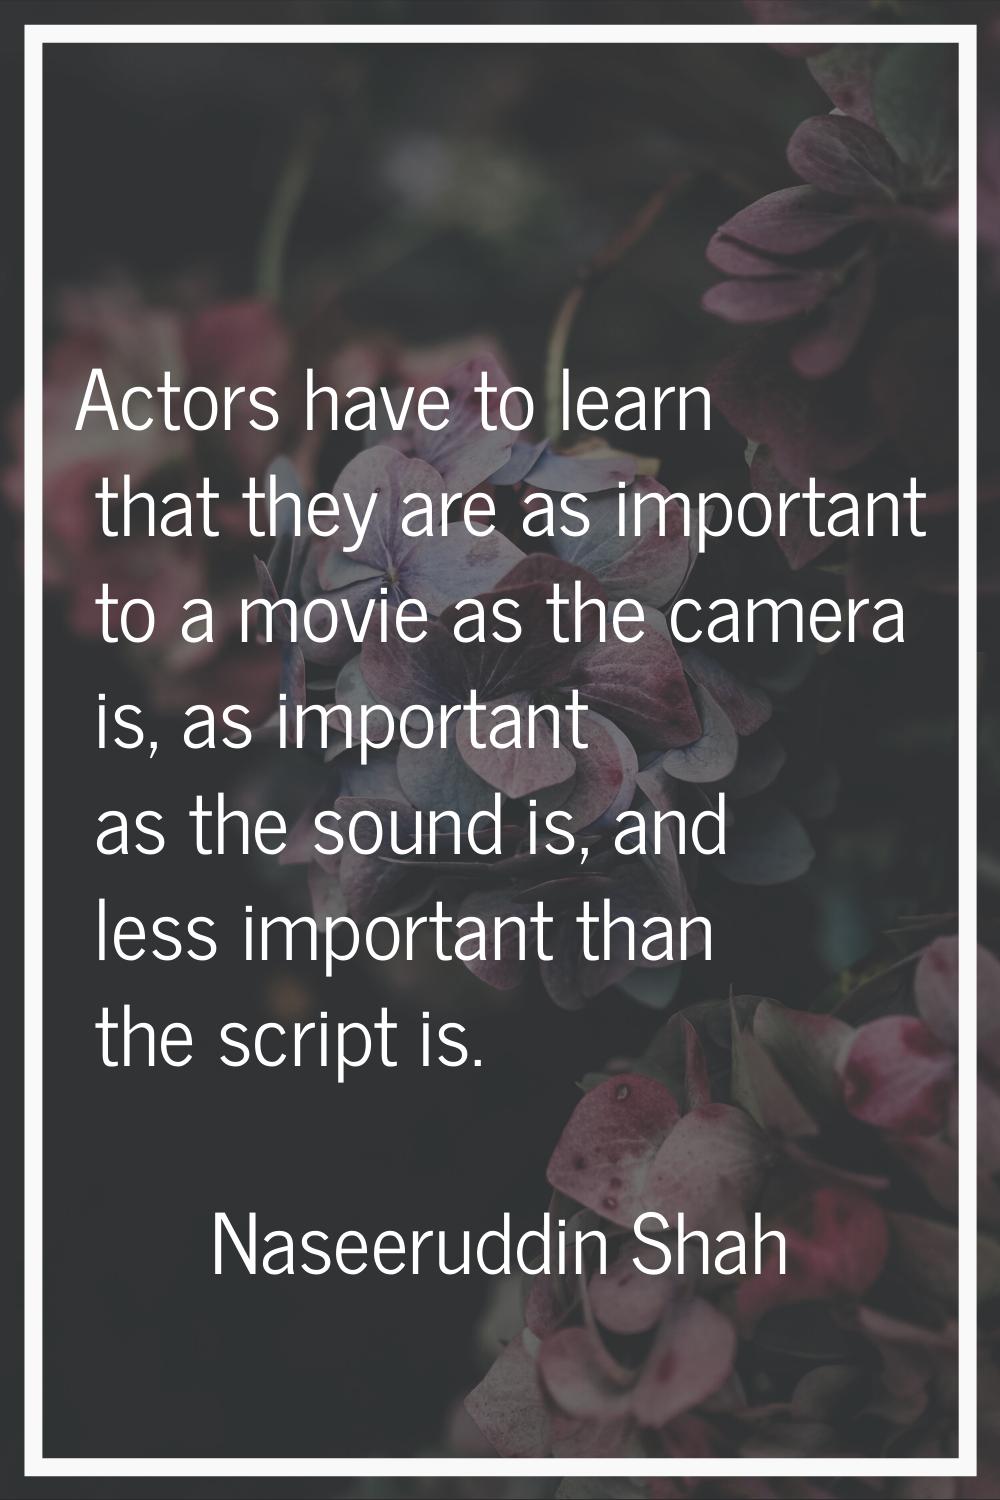 Actors have to learn that they are as important to a movie as the camera is, as important as the so